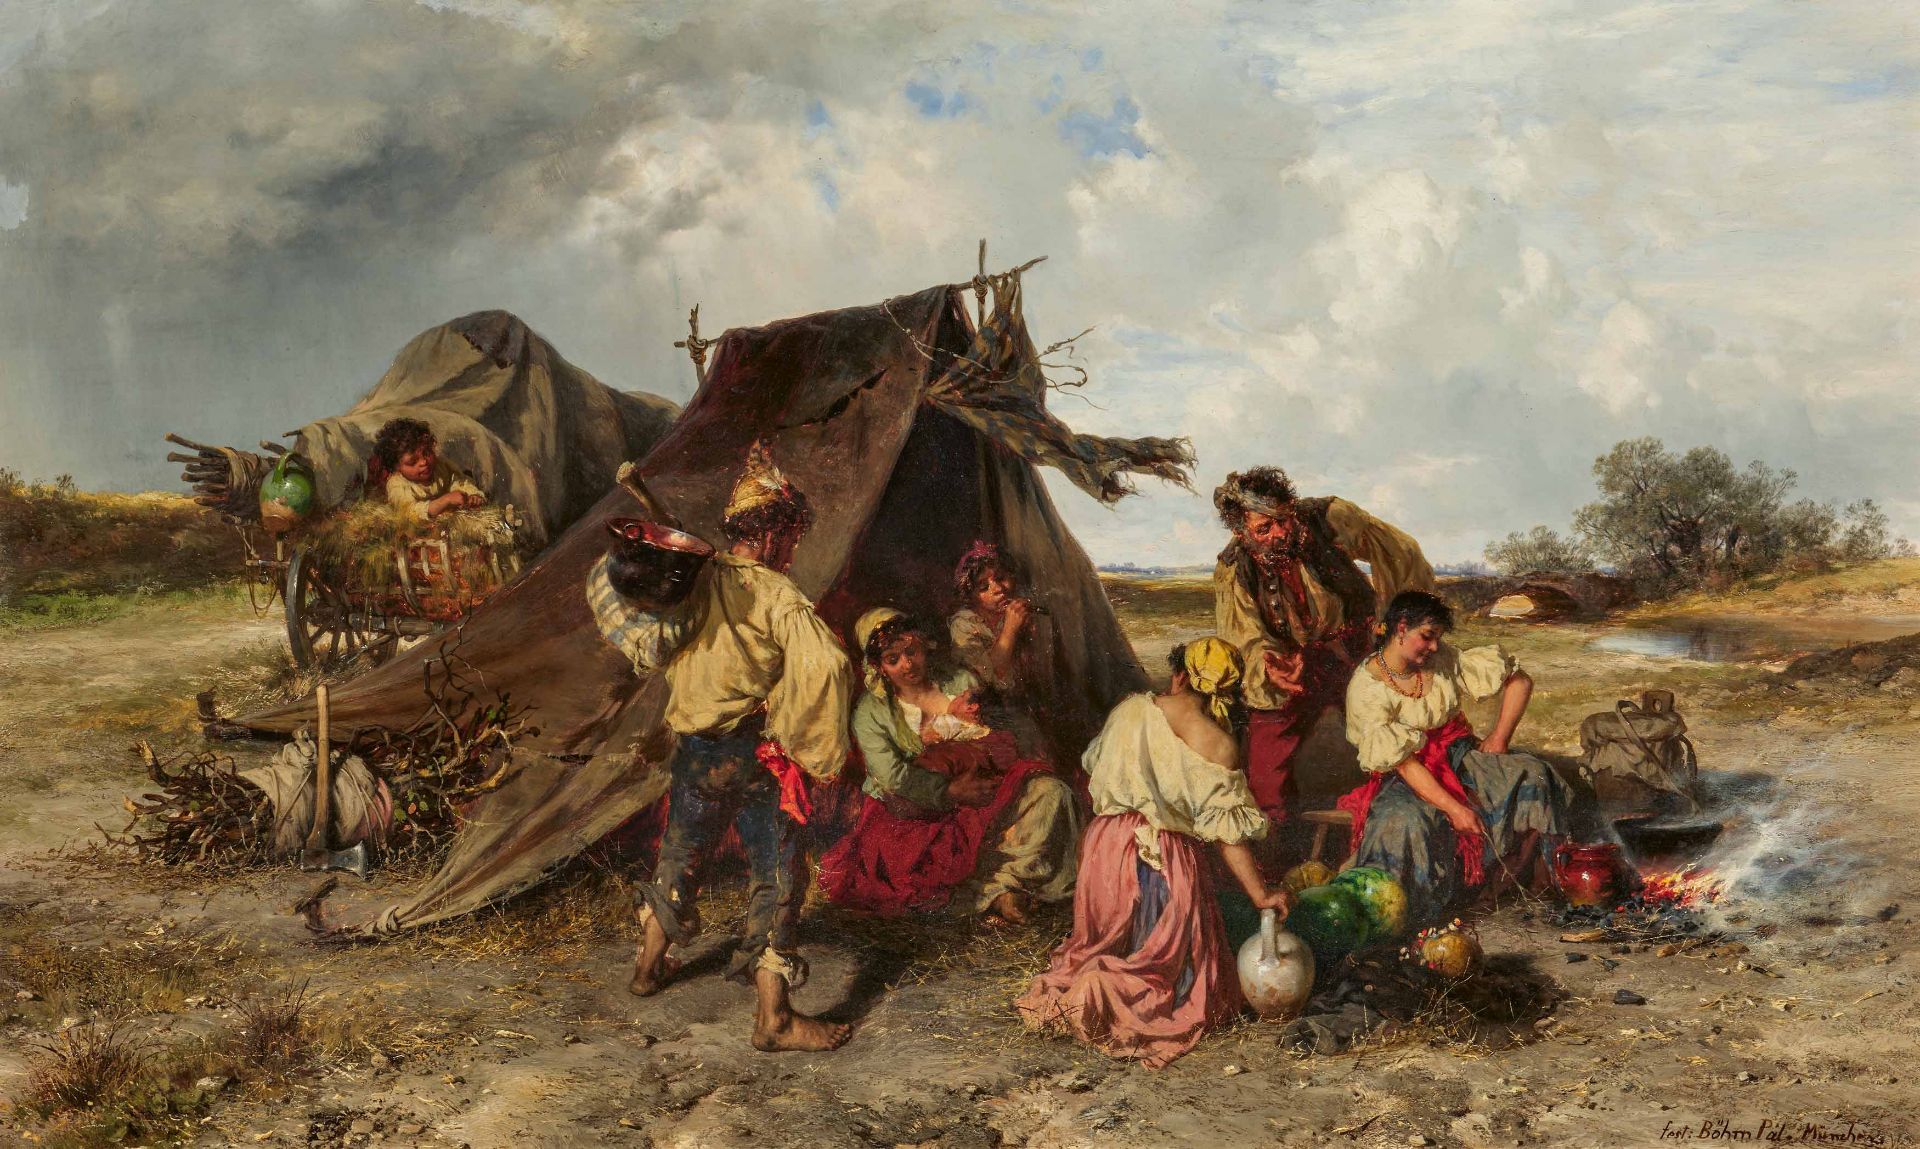 Pál Böhm: Family in the Camp in the Puszta